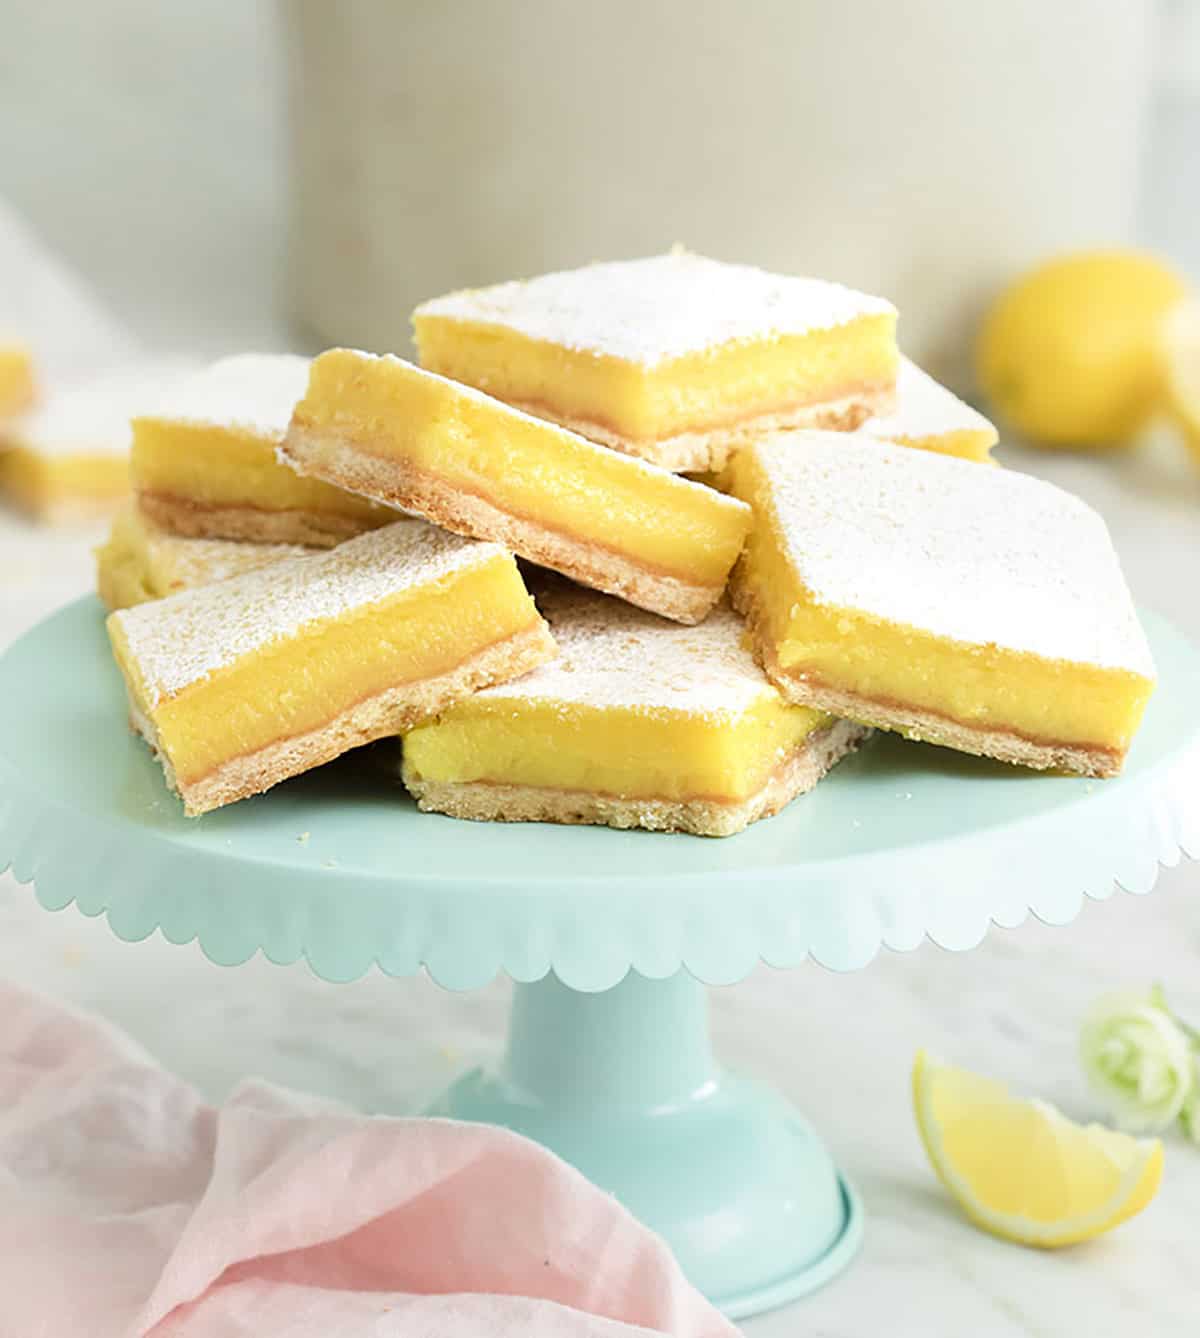 A large group of lemon bars on a blue cake stand.